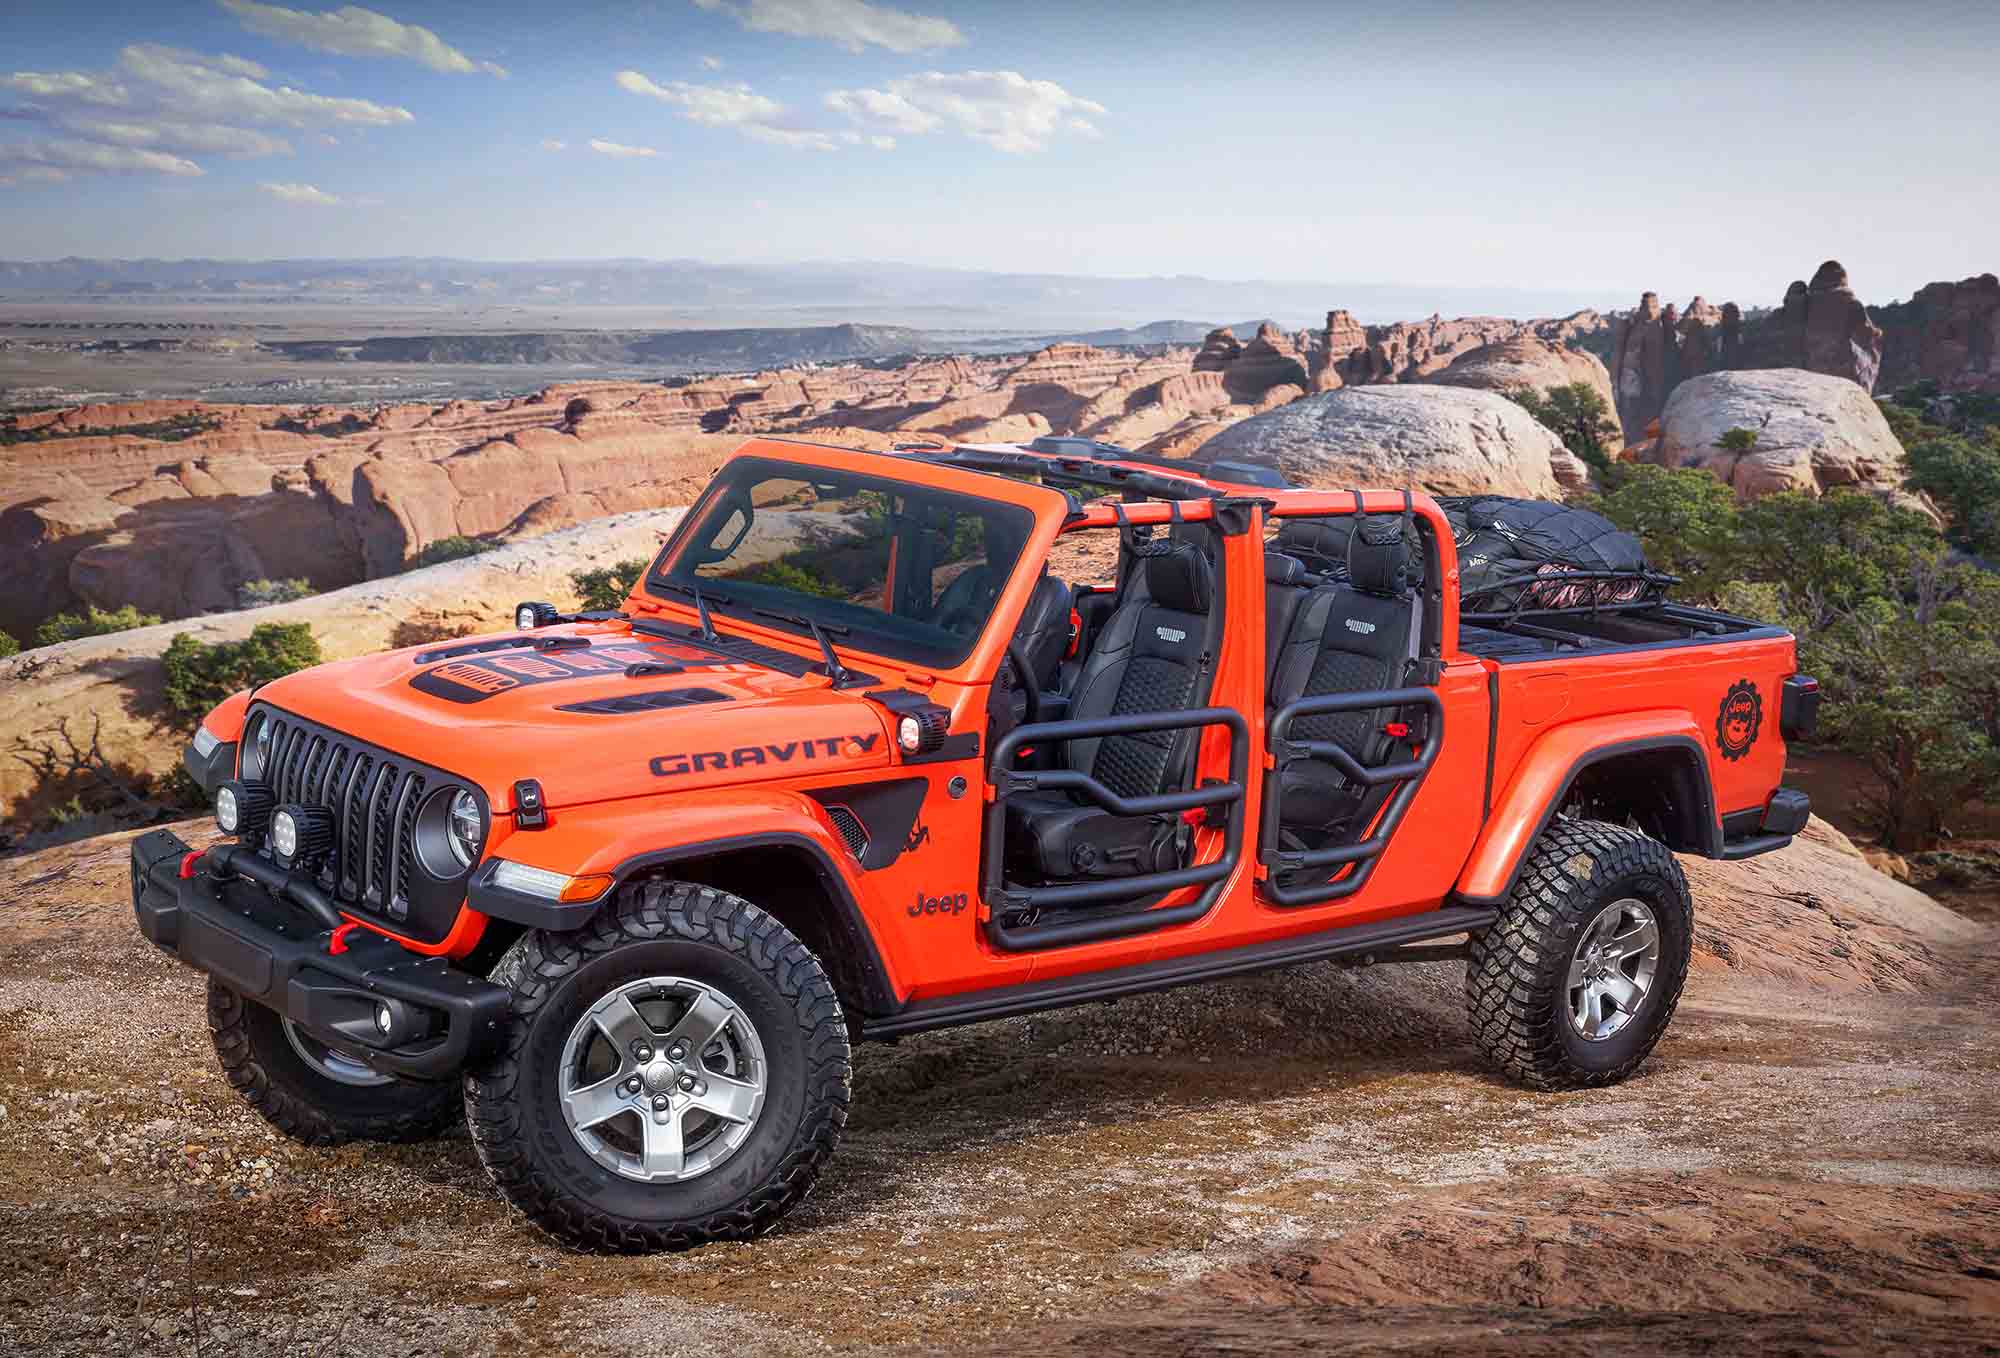 Jeep Gladiator Tire Size Guide: What Are The Biggest Tires That Fit